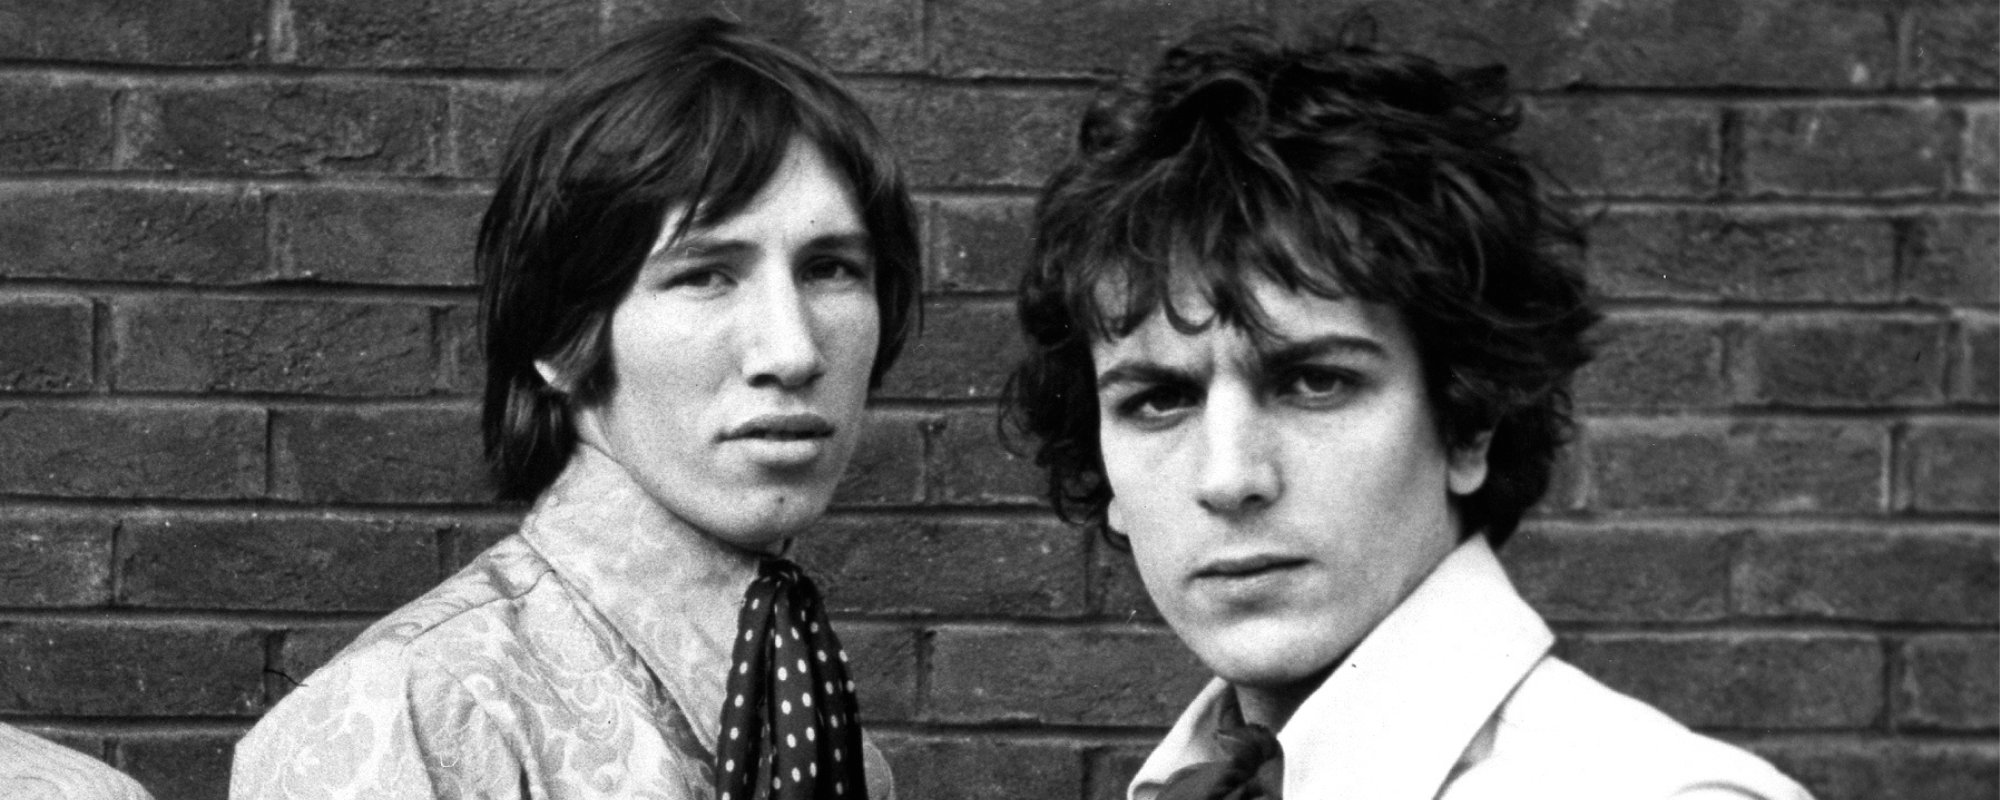 The Meaning Behind Pink Floyd’s “Brain Damage,” Roger Waters’ Commentary on Mental Health and an Estranged Bandmate